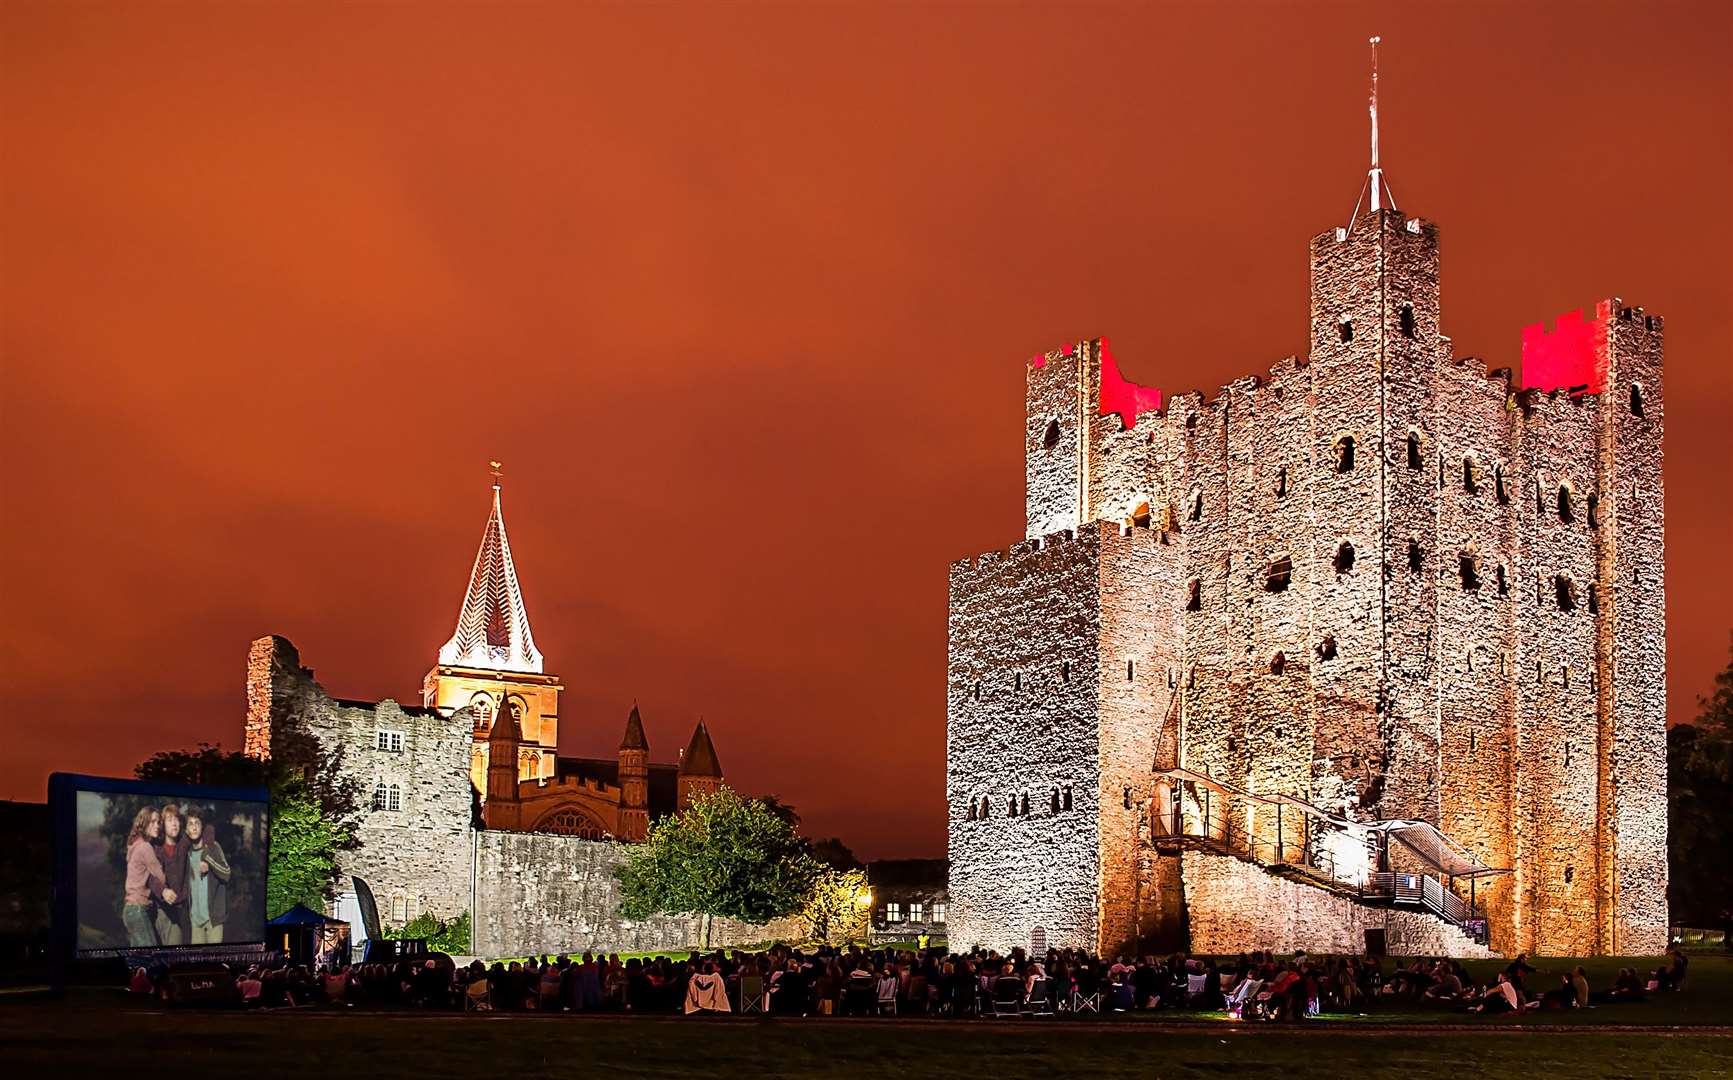 Rochester Castle will screen Harry Potter and the Prisoner of Azkaban among this weekend's films